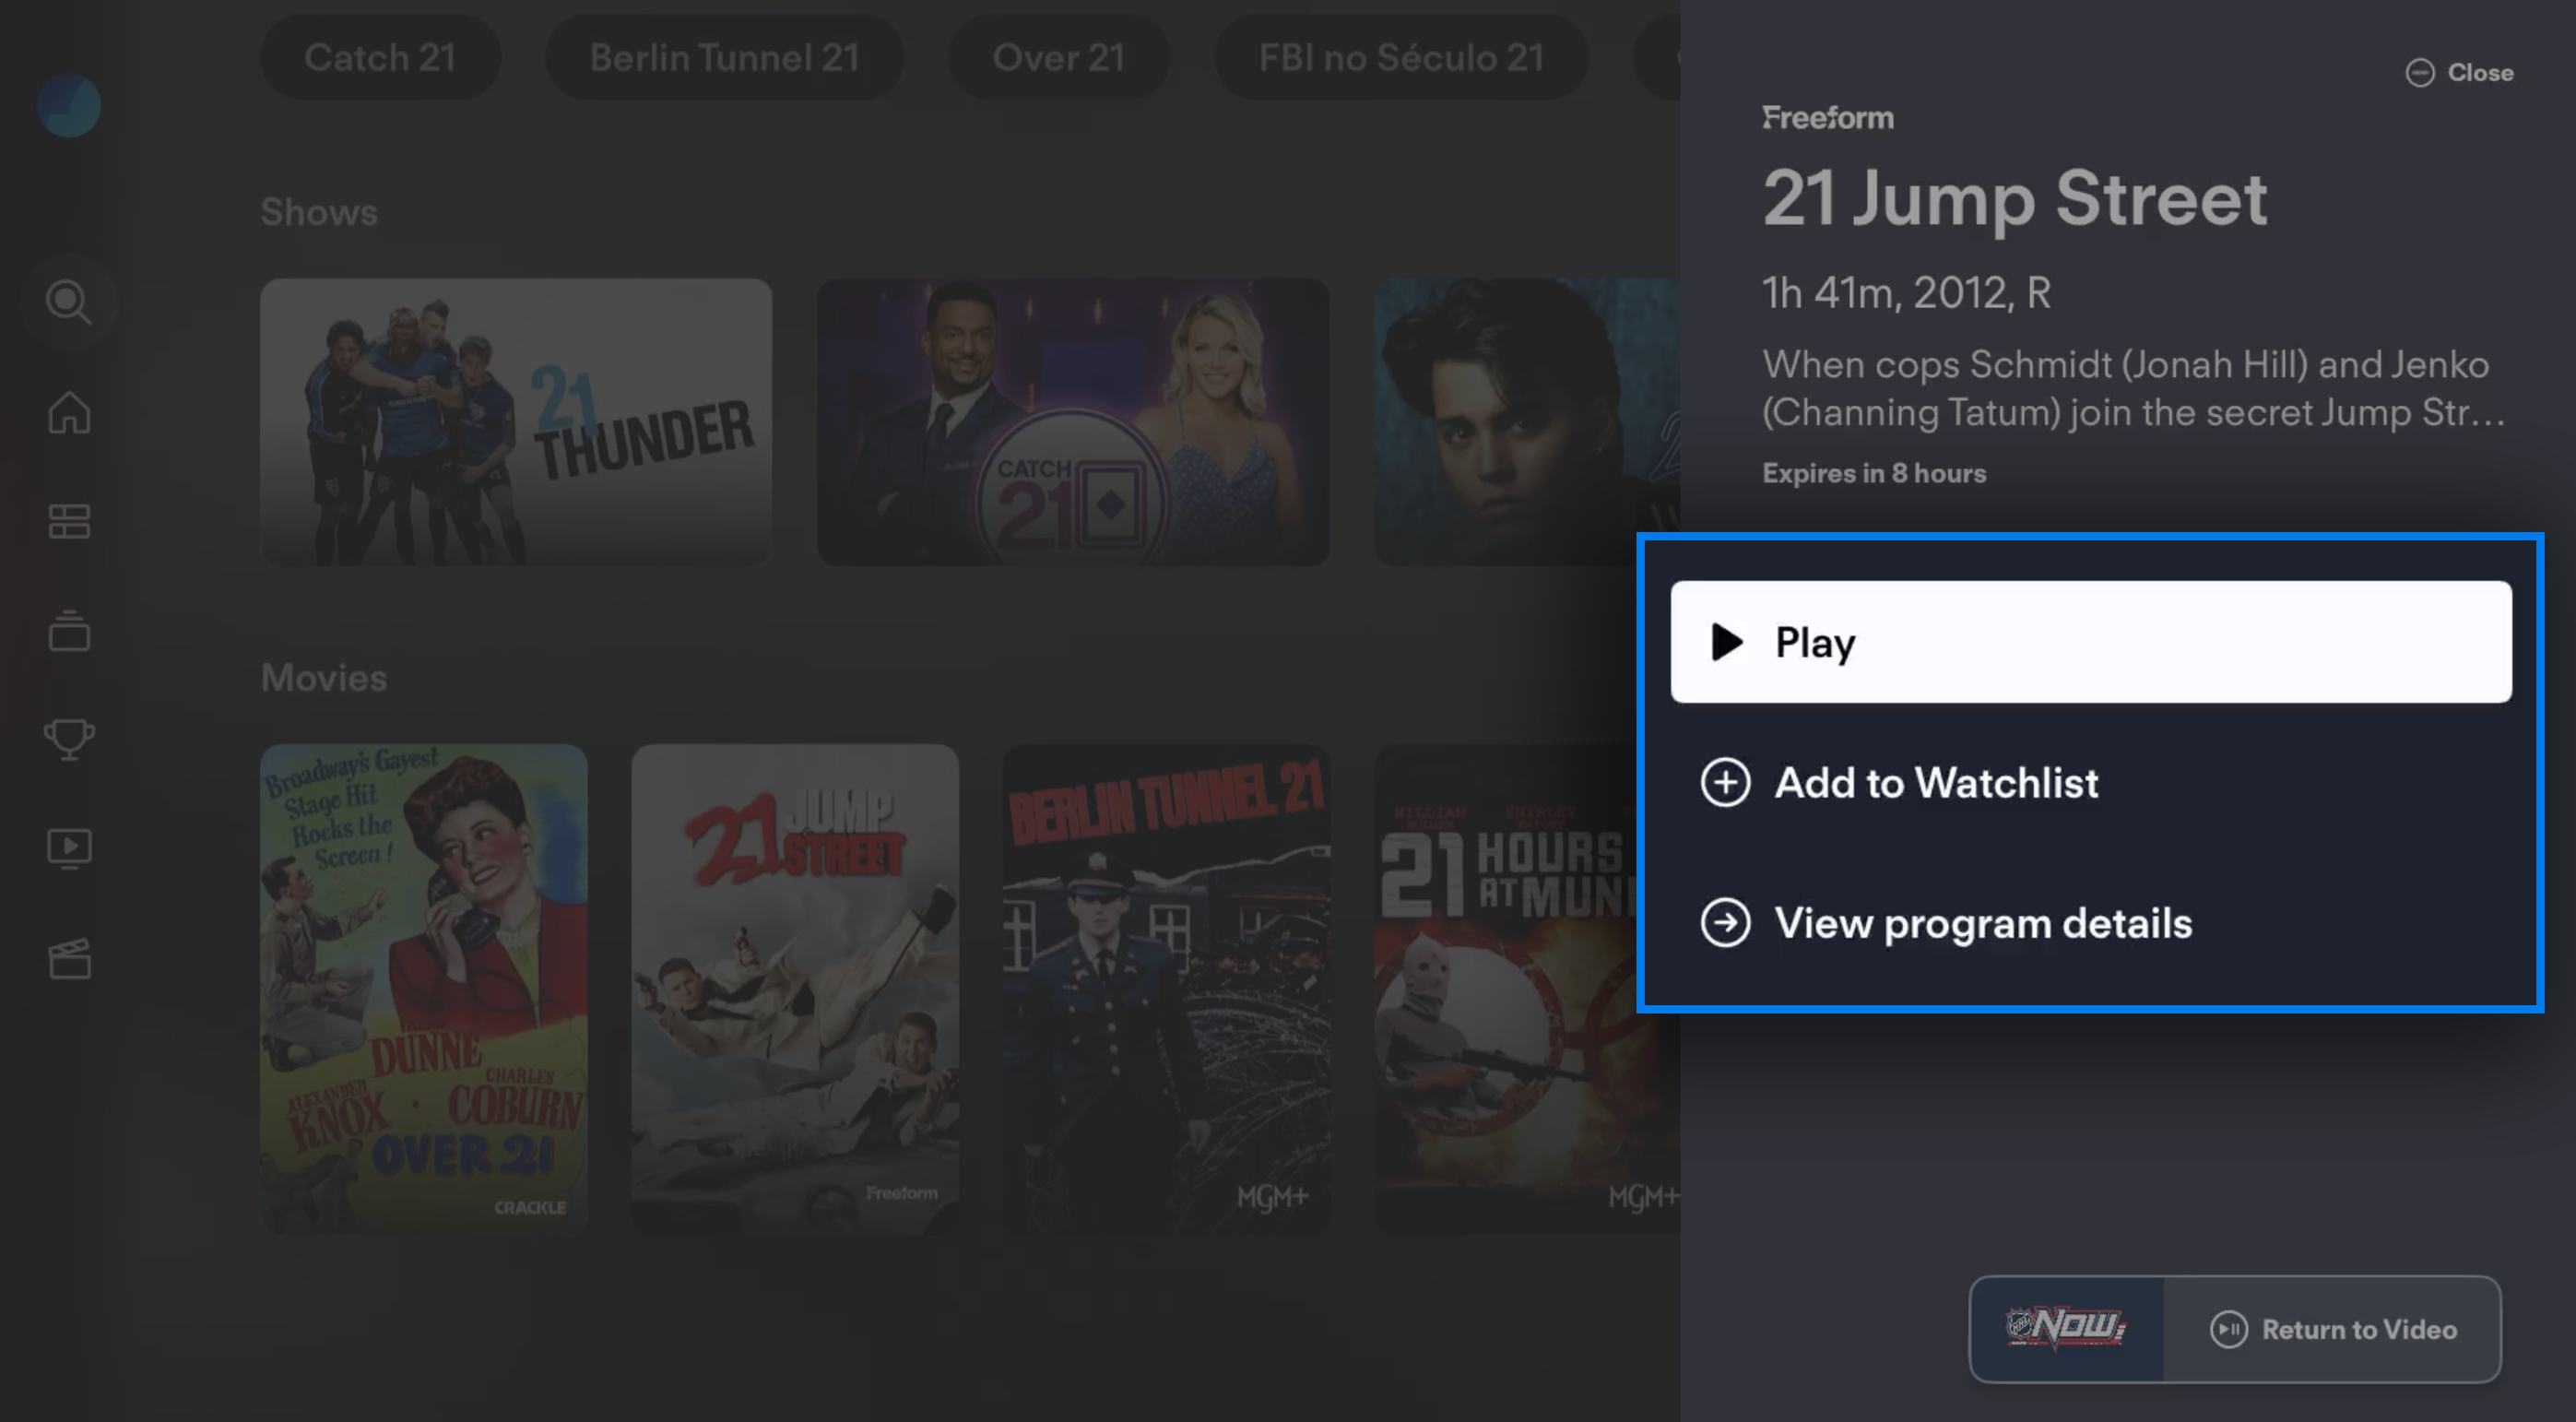 Program information screen from a search result in the FuboTV app on a connected device